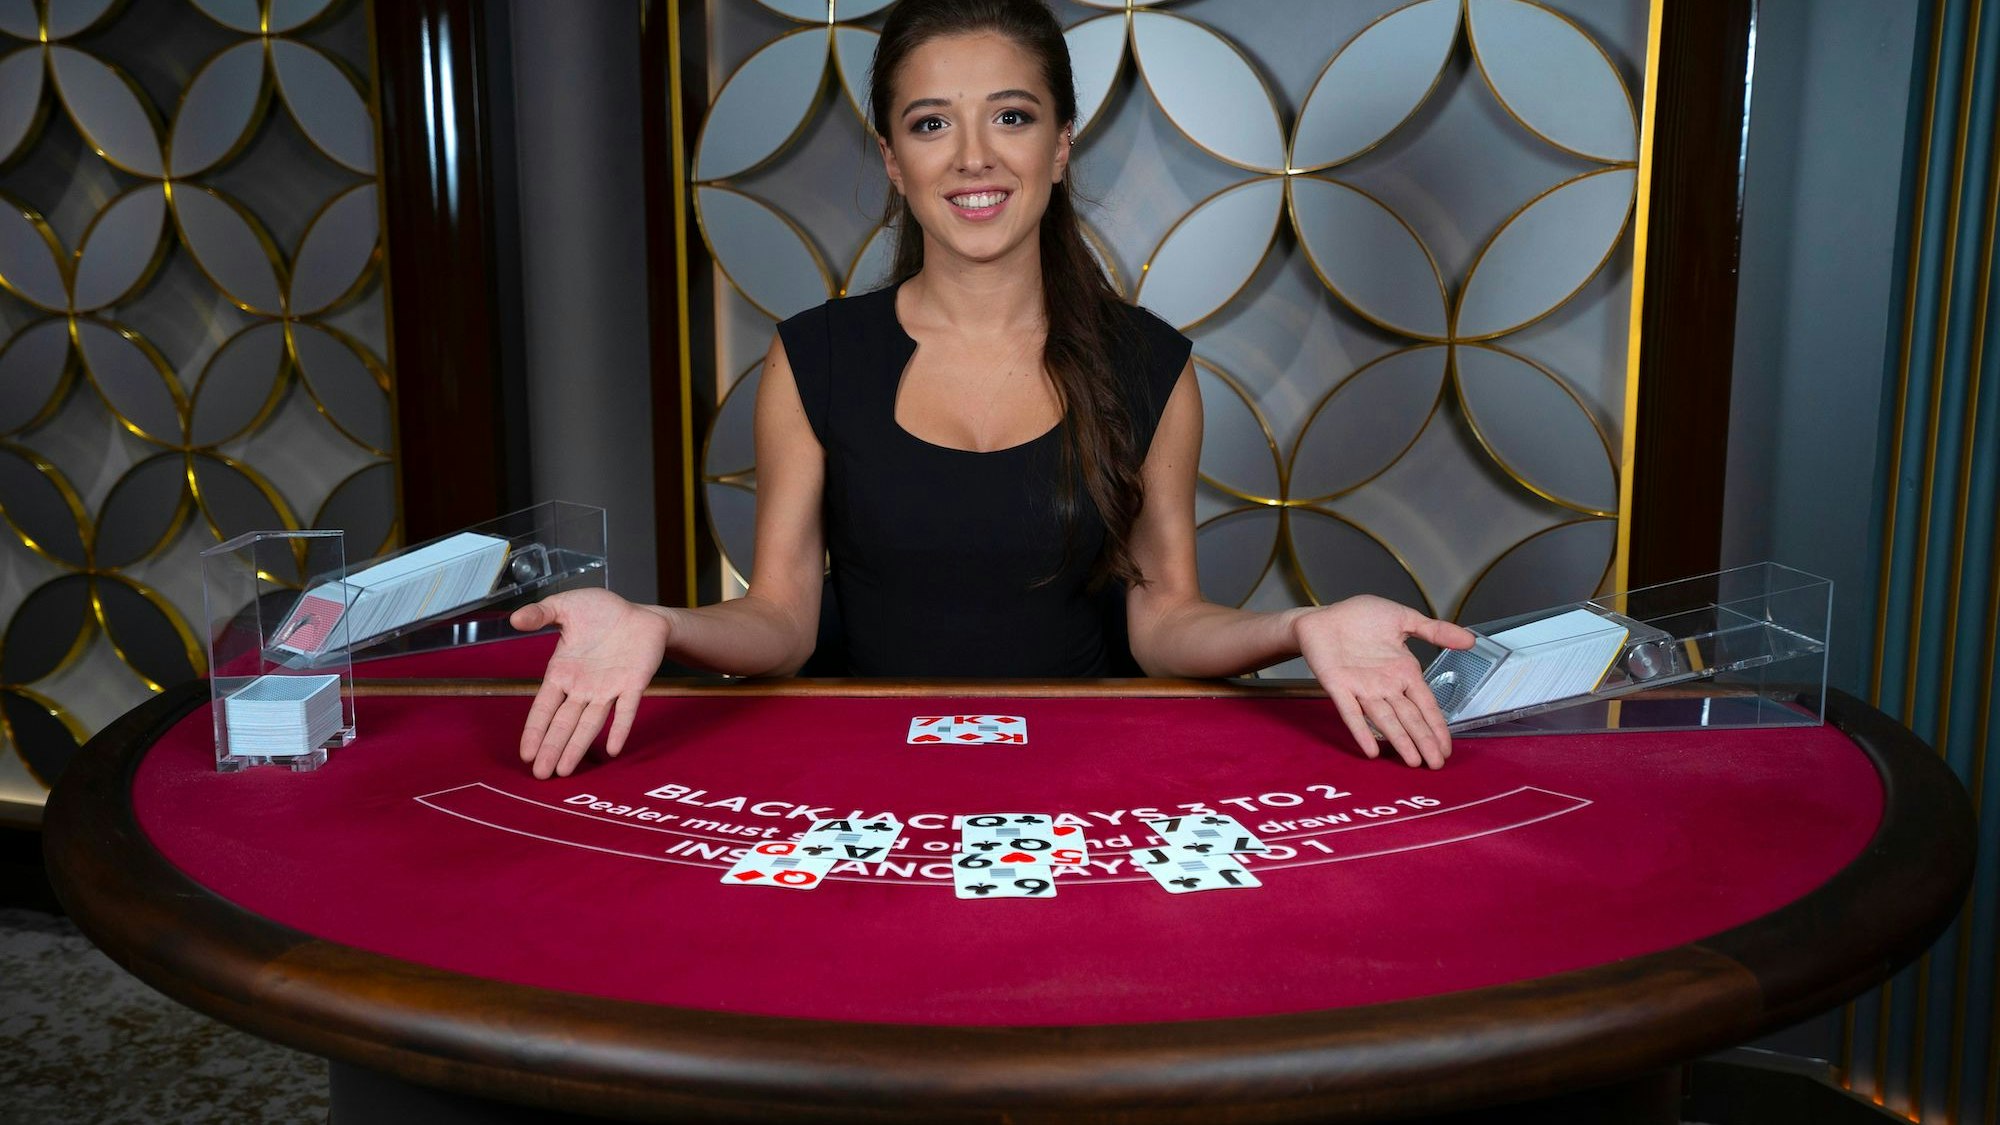 play live dealer games online at twinspires casino | the twinspires edge